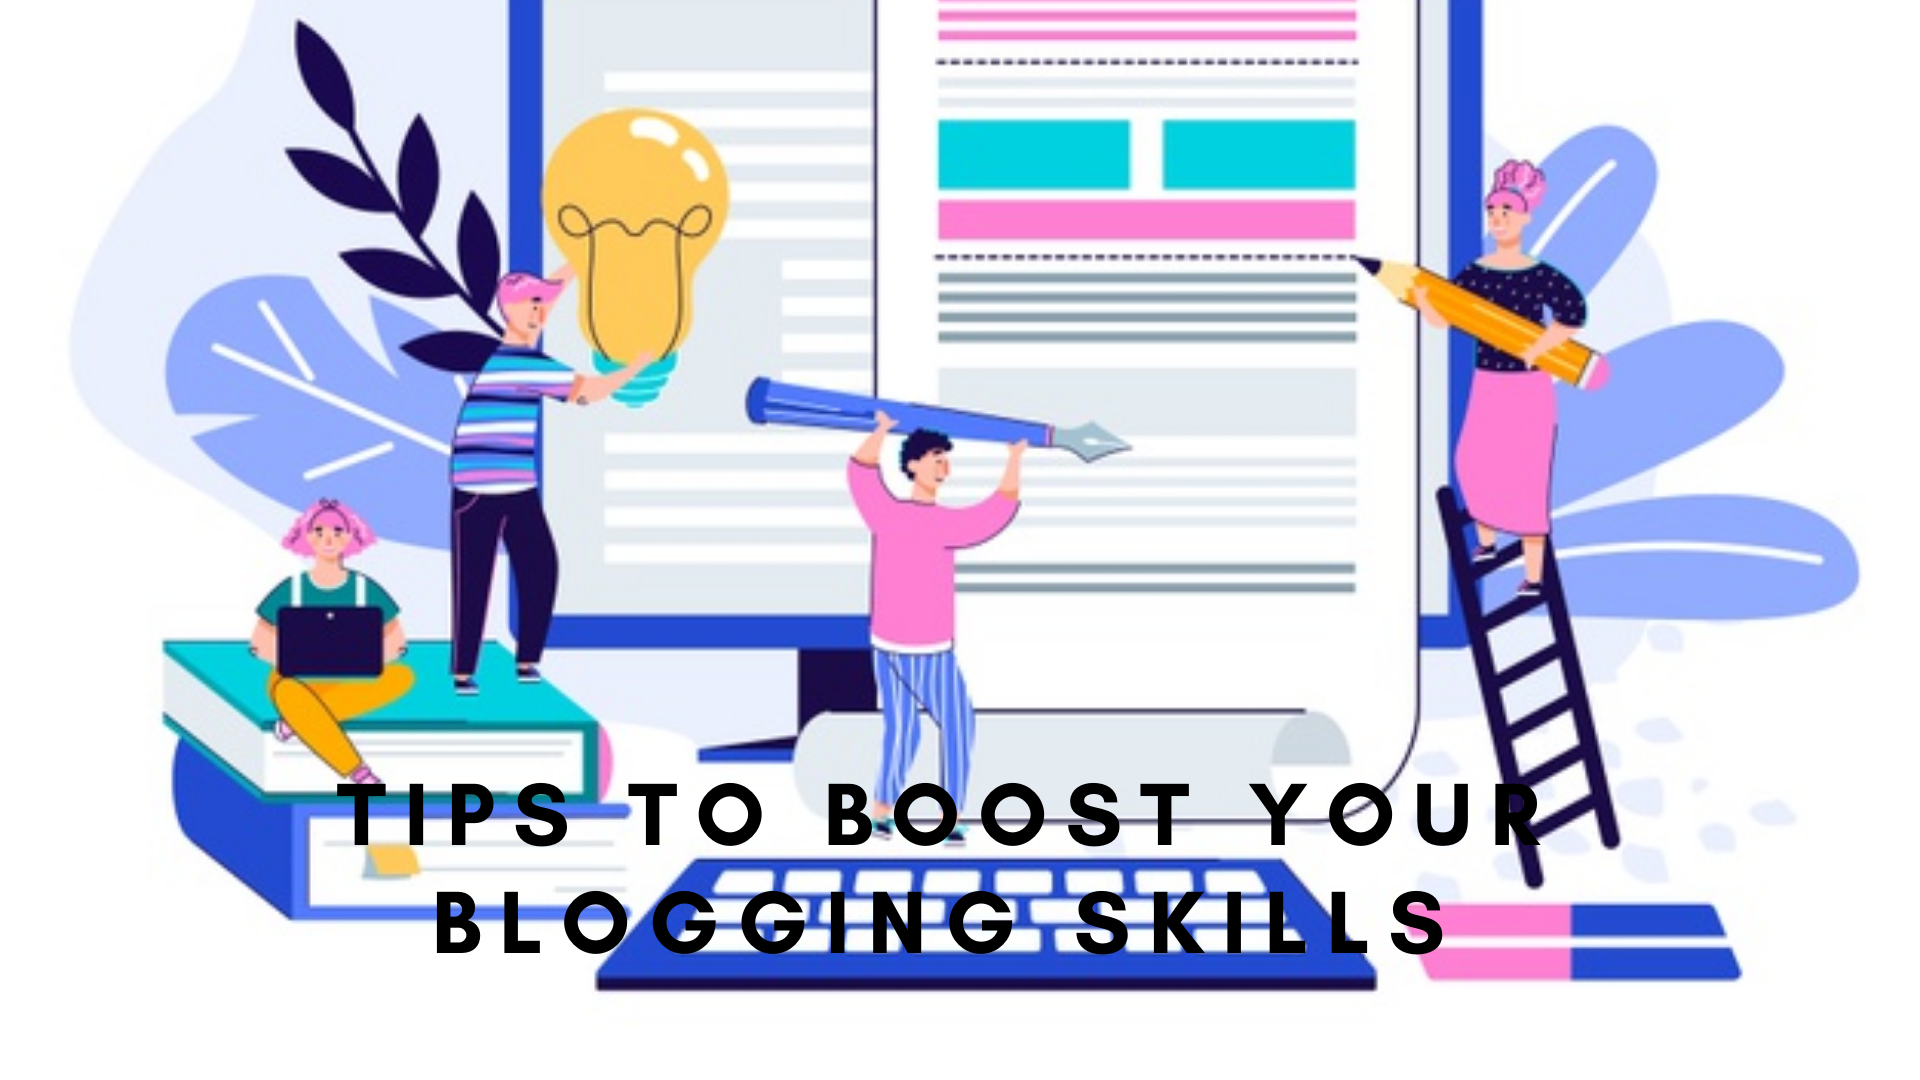 Tips to boost your blogging skills